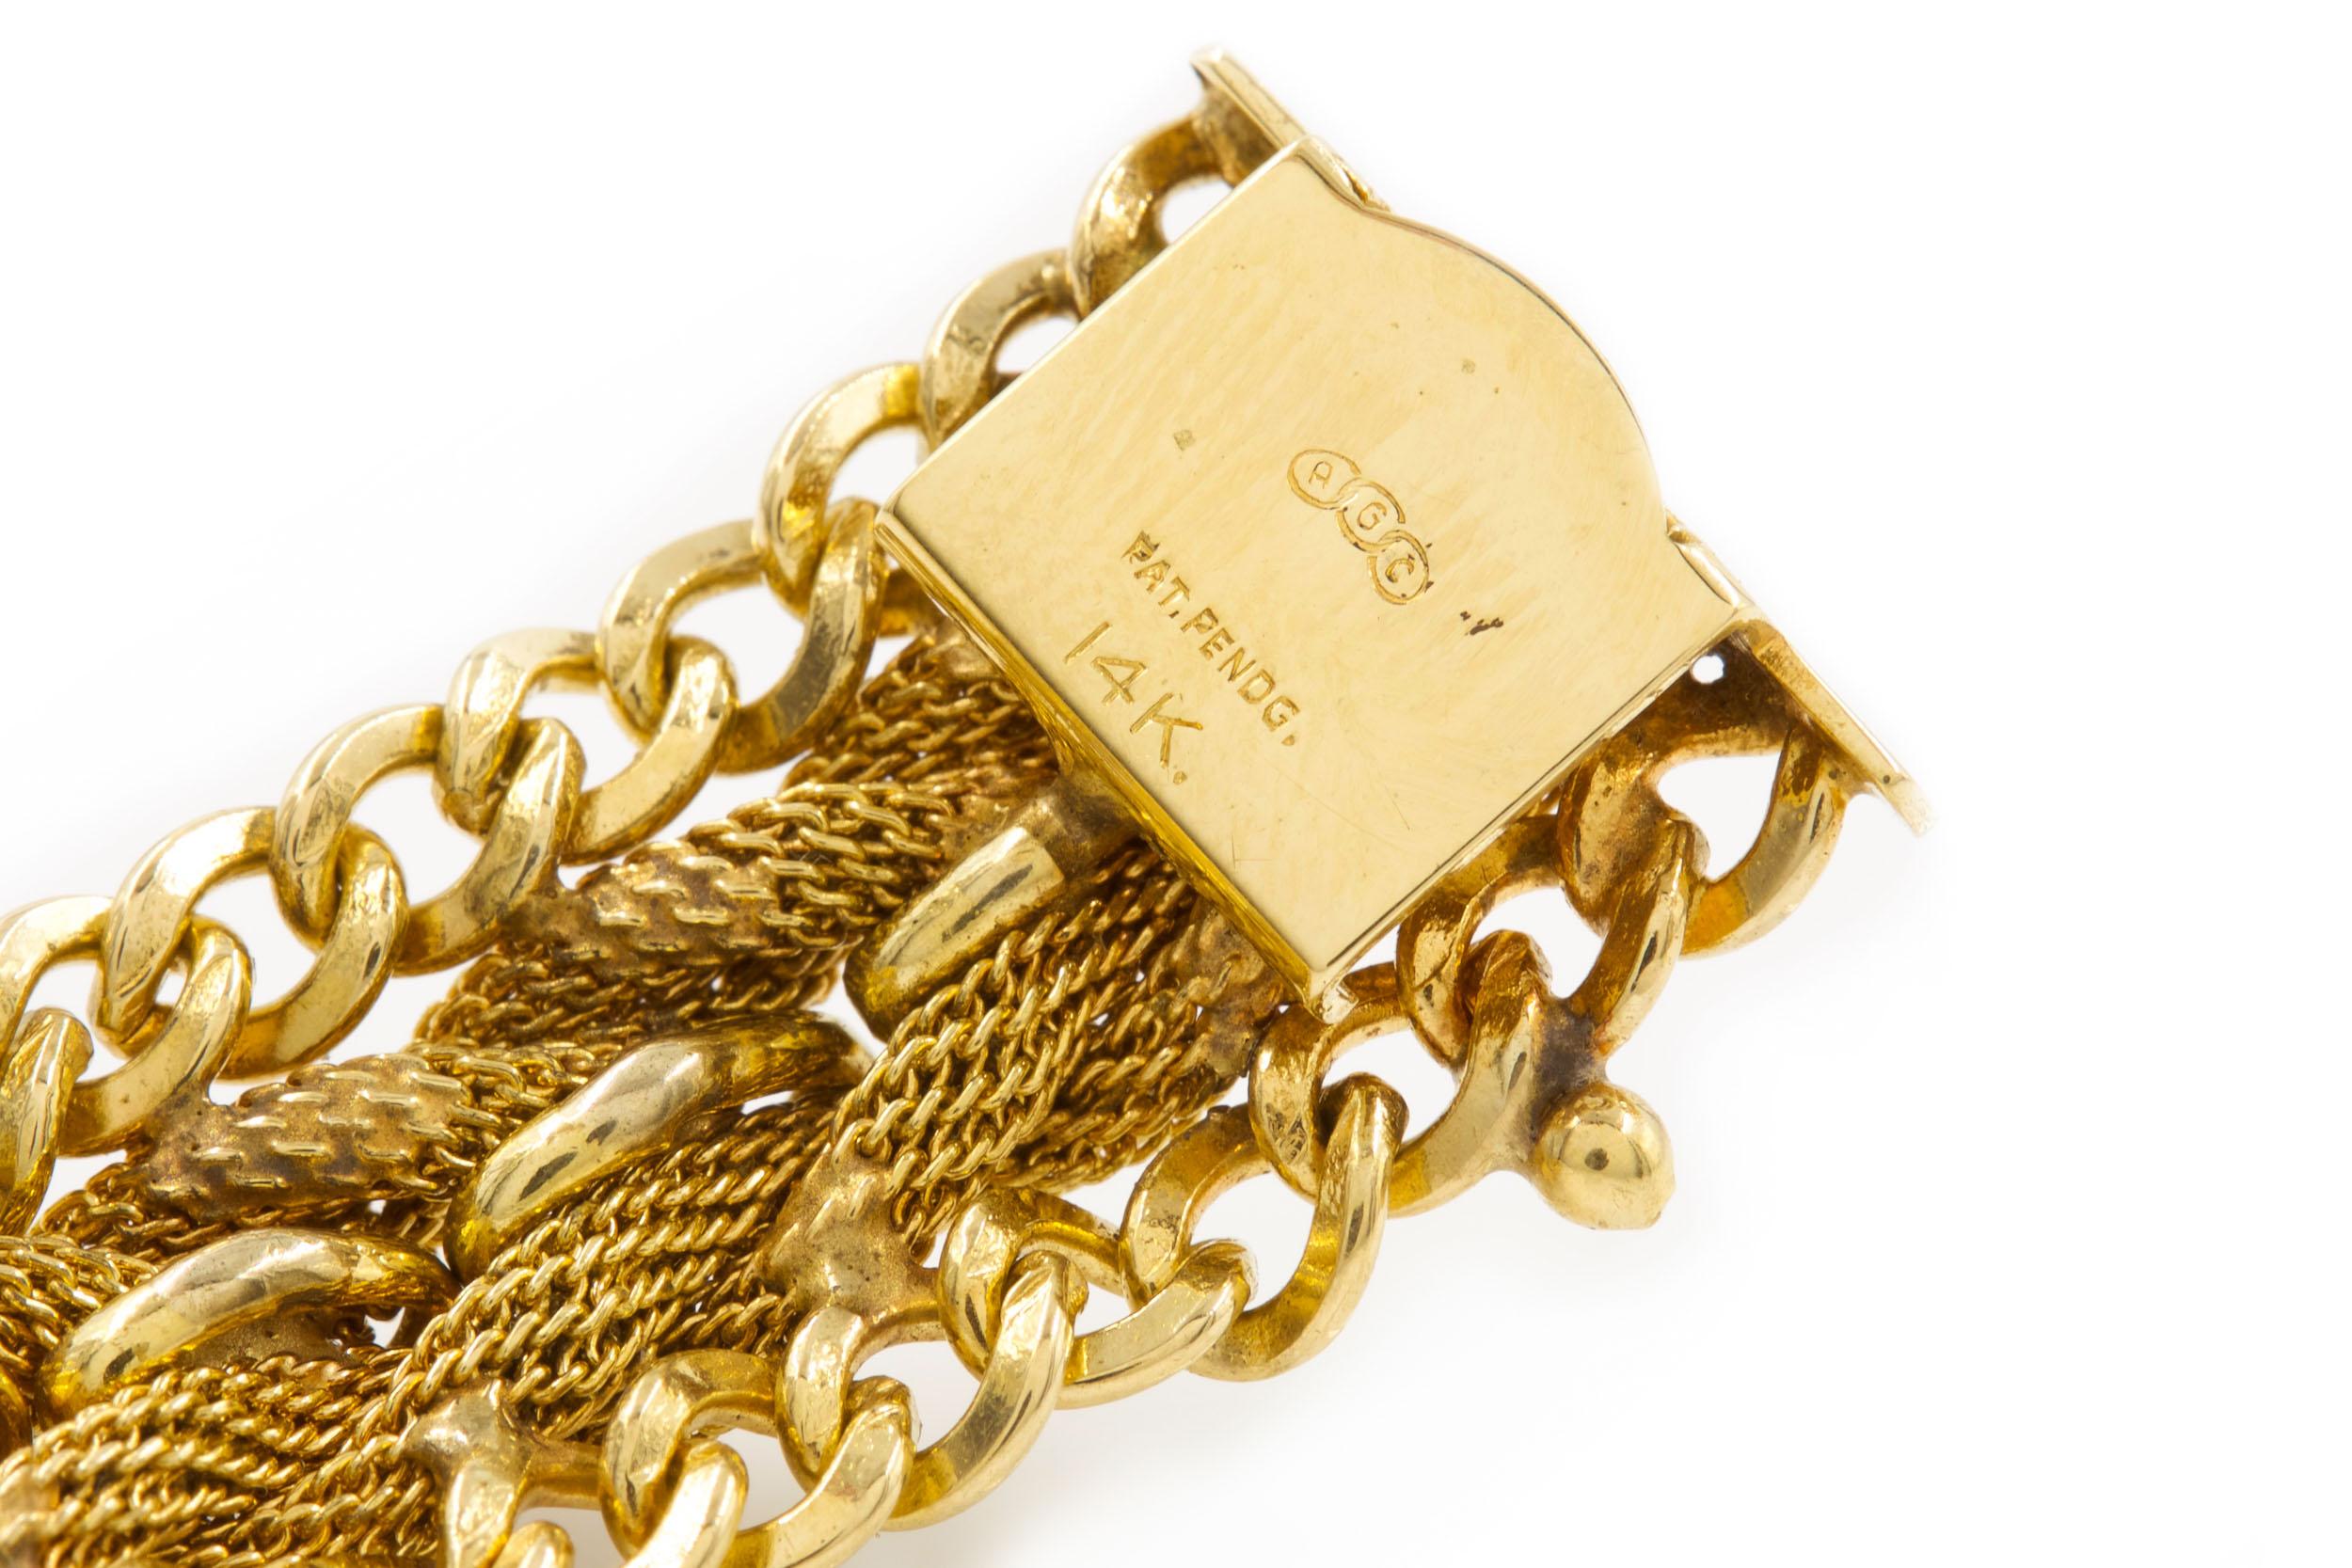 Vintage 14k Gold Woven and Chain-Link Bracelet by AGC circa 1990  6 3/4